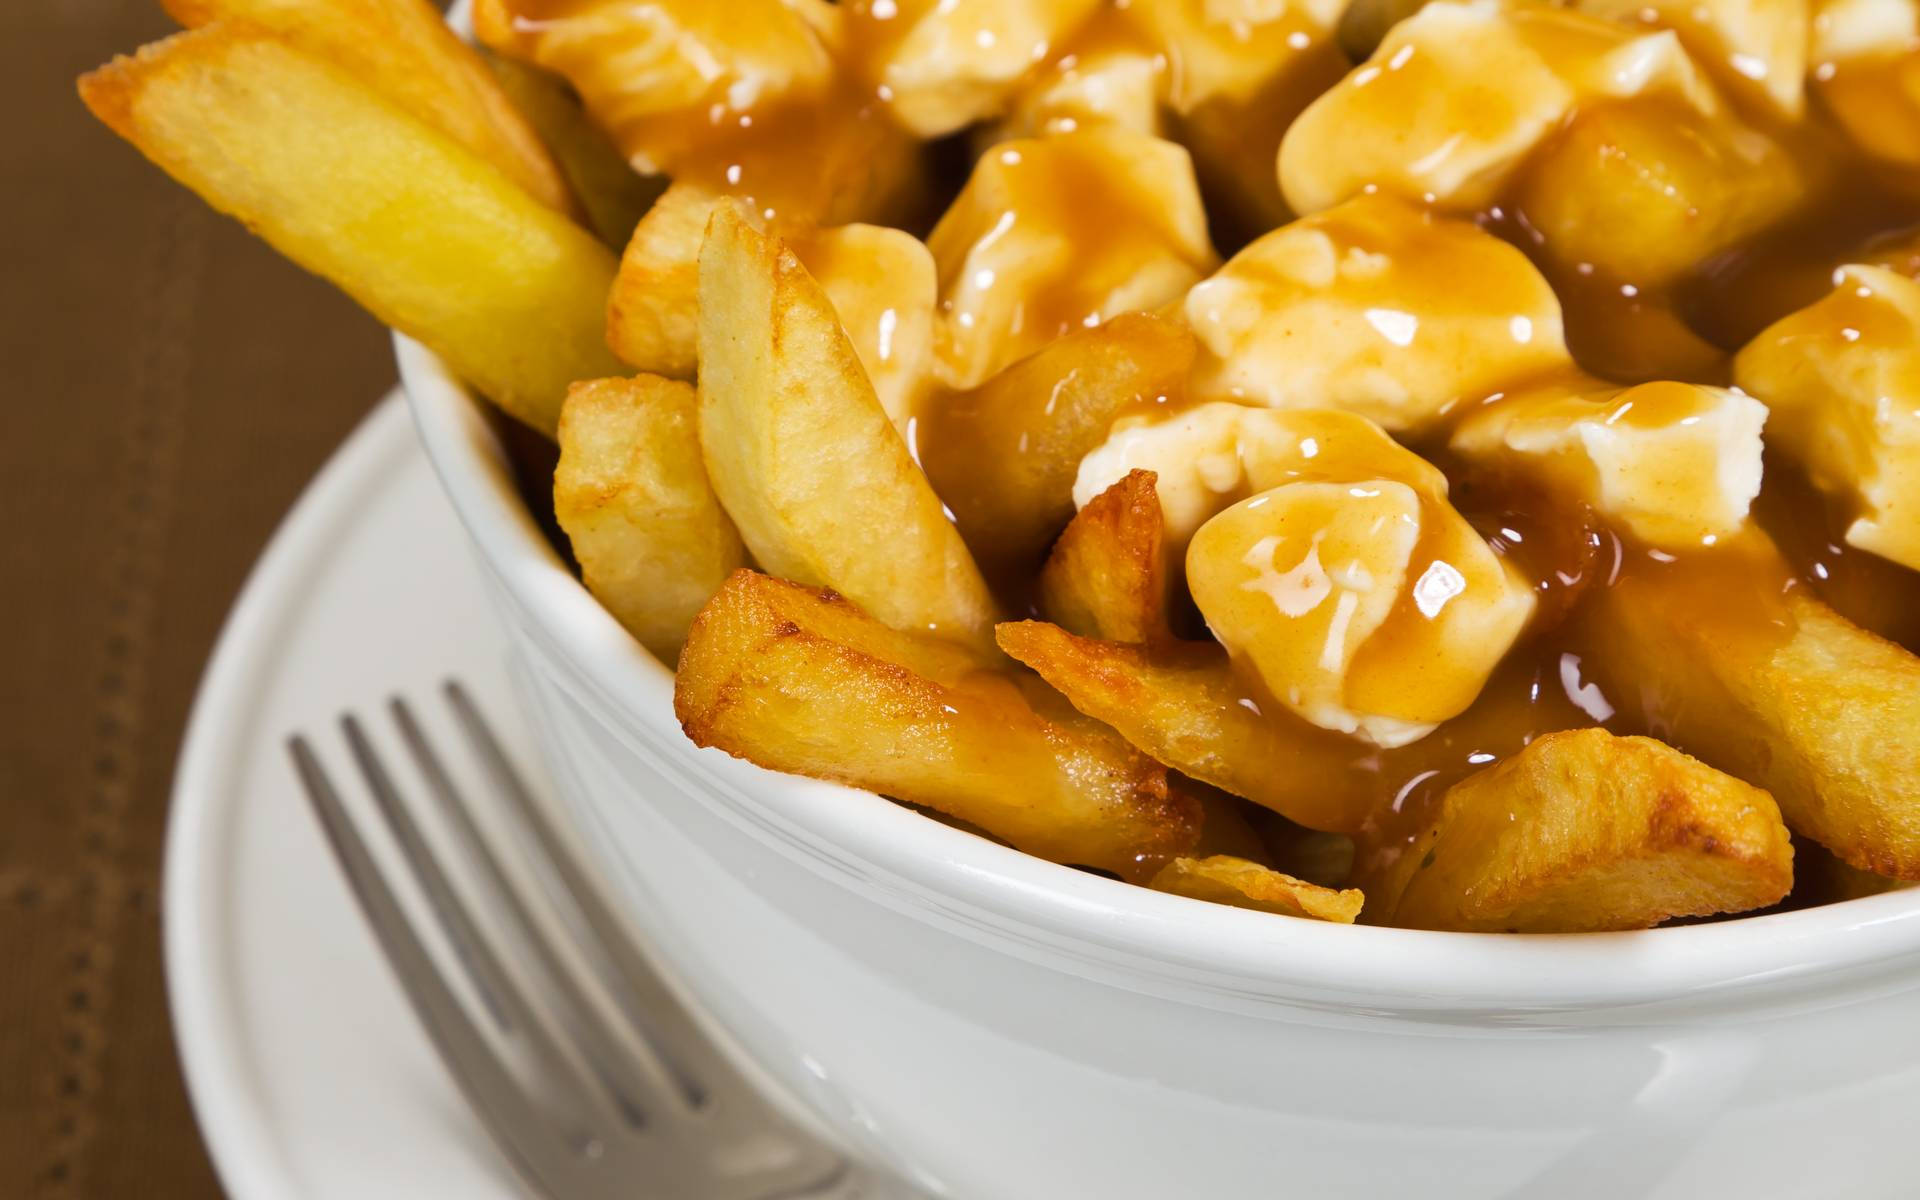 Delicious Poutine Dish in Close-Up View Wallpaper